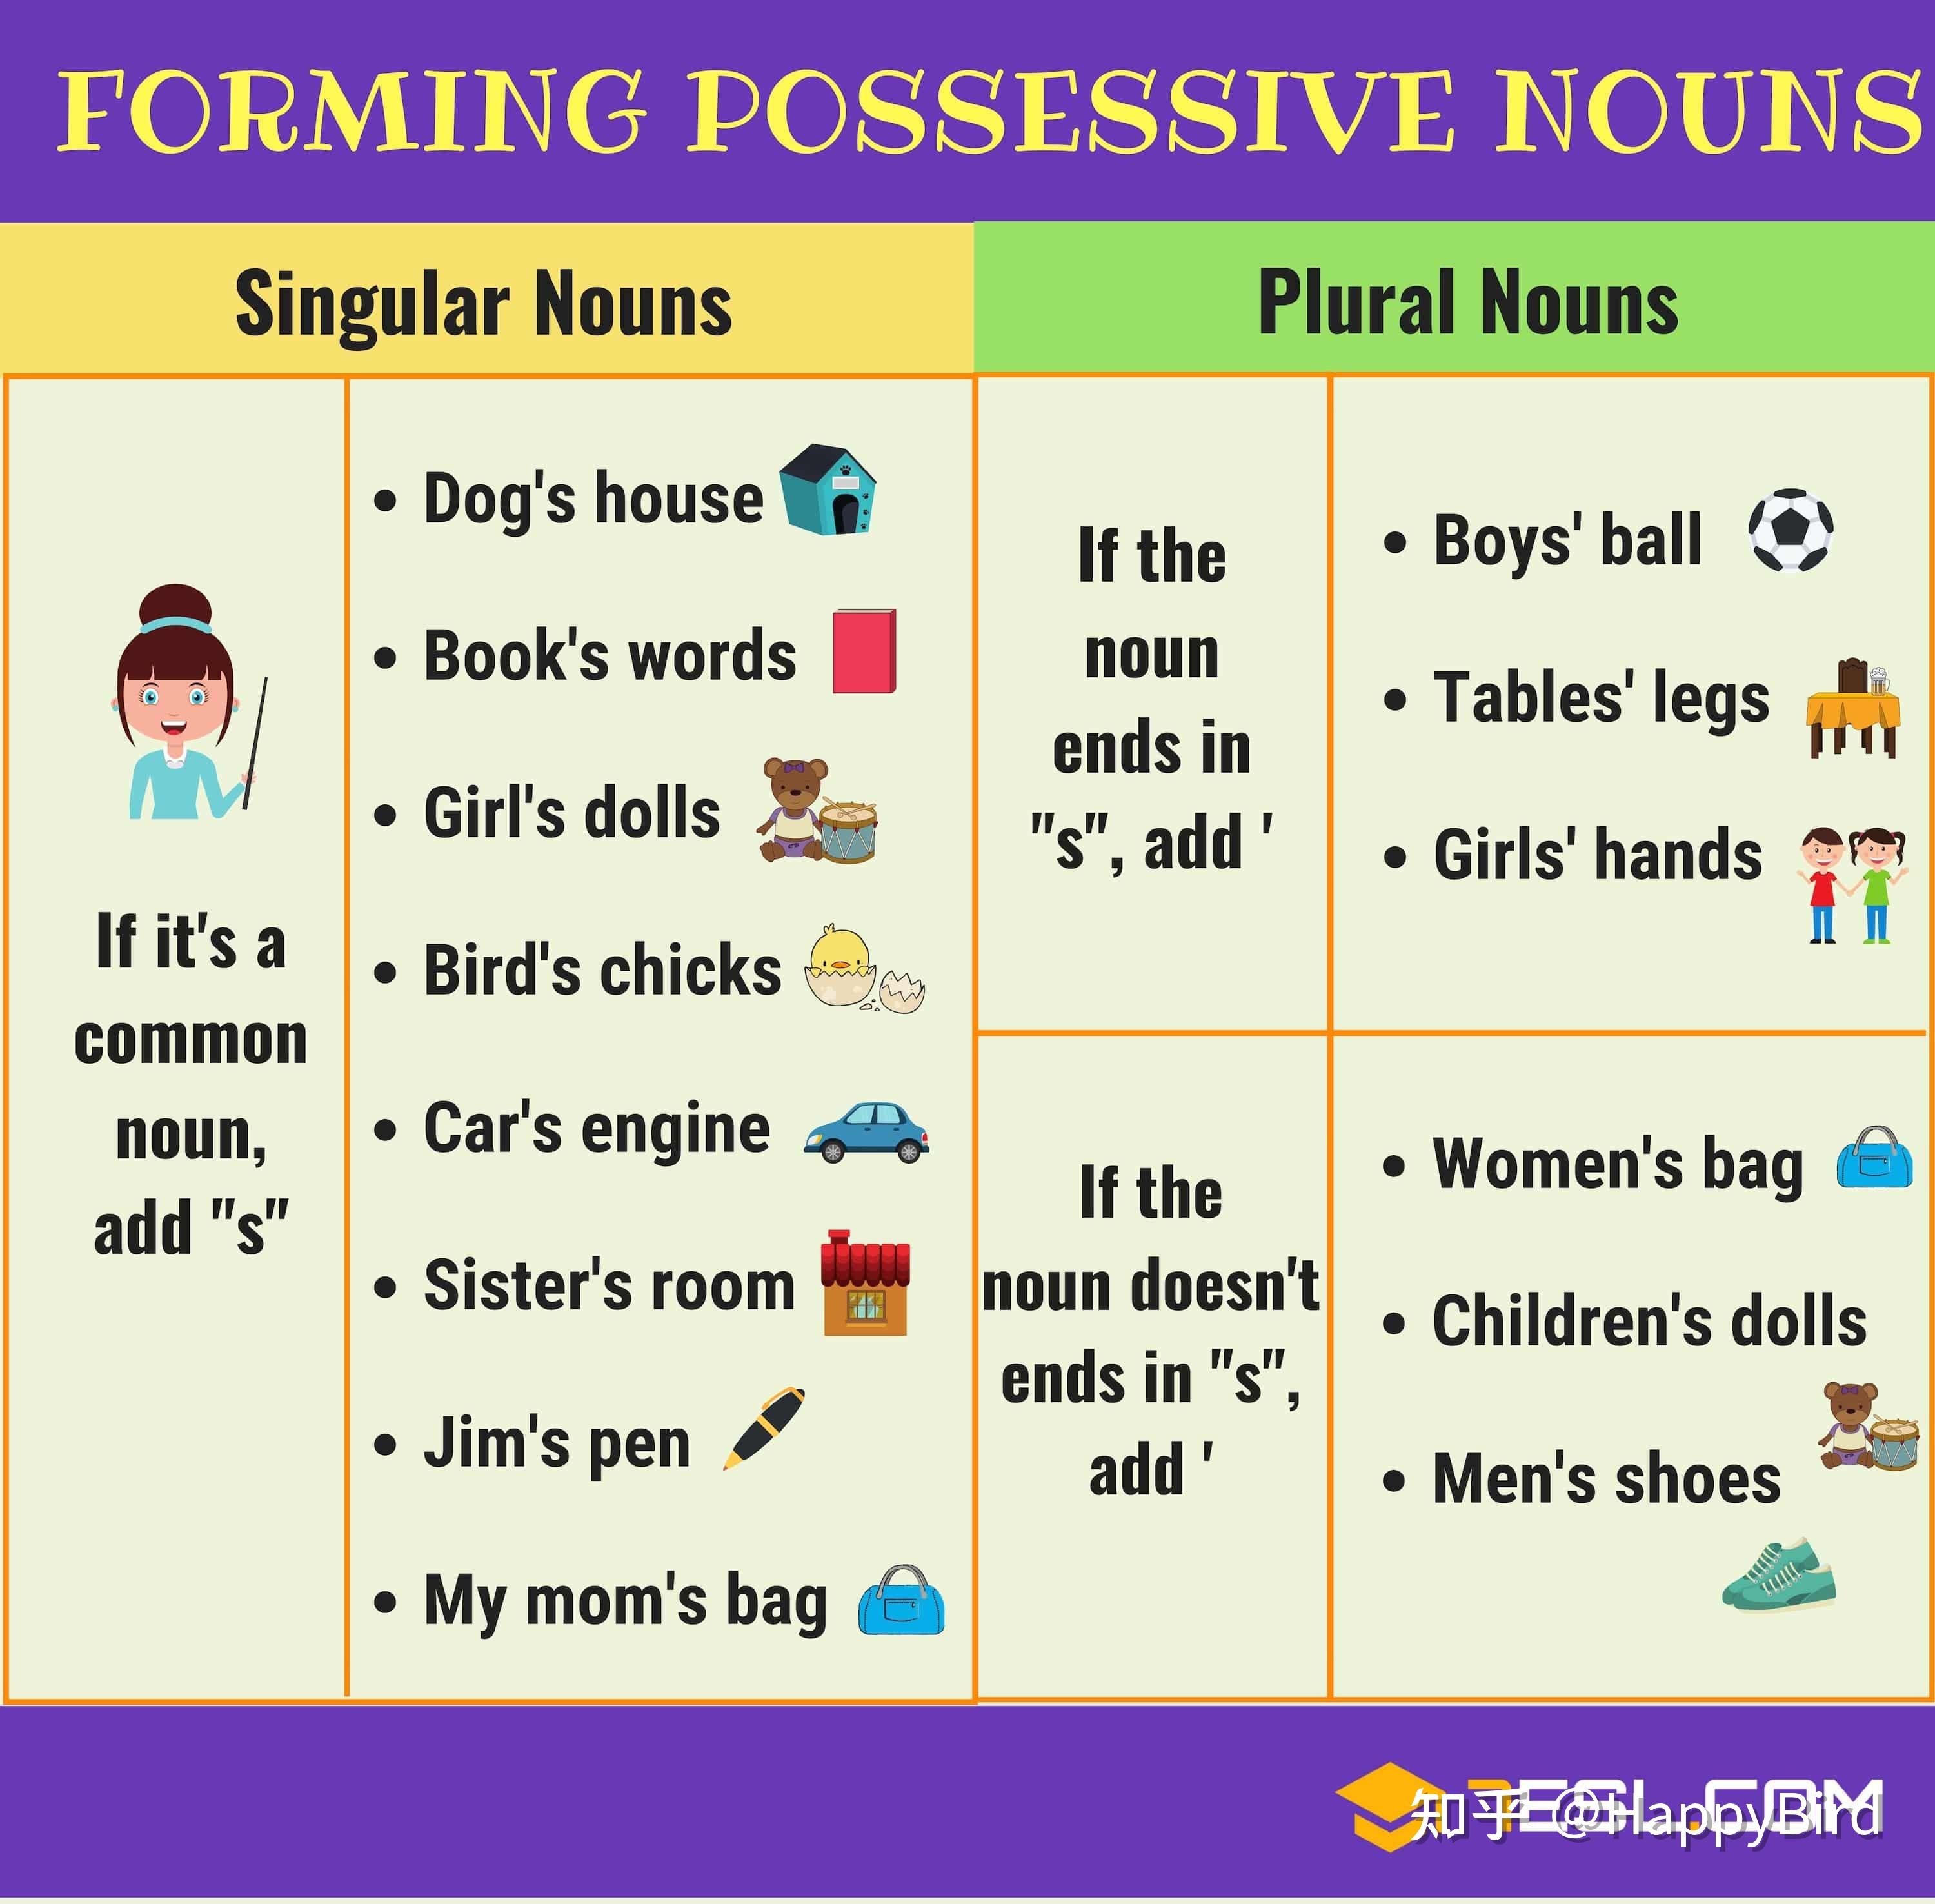 How To Make A Noun Possessive That Ends In S